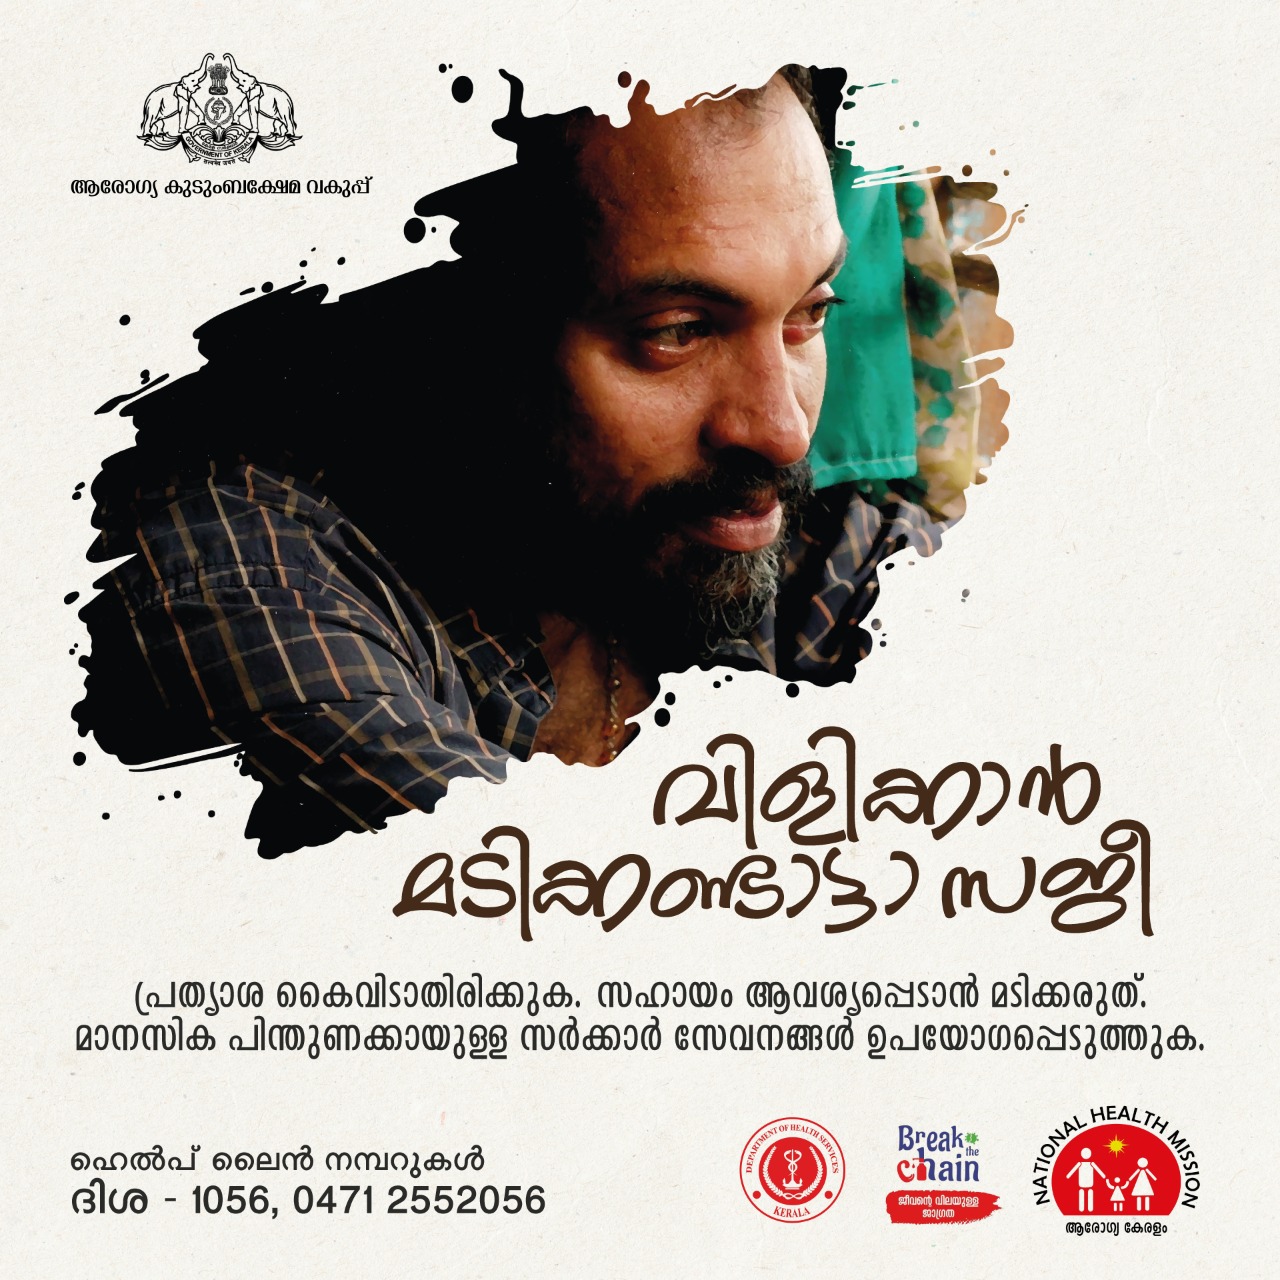 Image of Saji from the film when he calls to his brother to take him to the doctor. Text reads "Don't hesitate to call, Saji" in Malayalam, and the helpline number for mental health